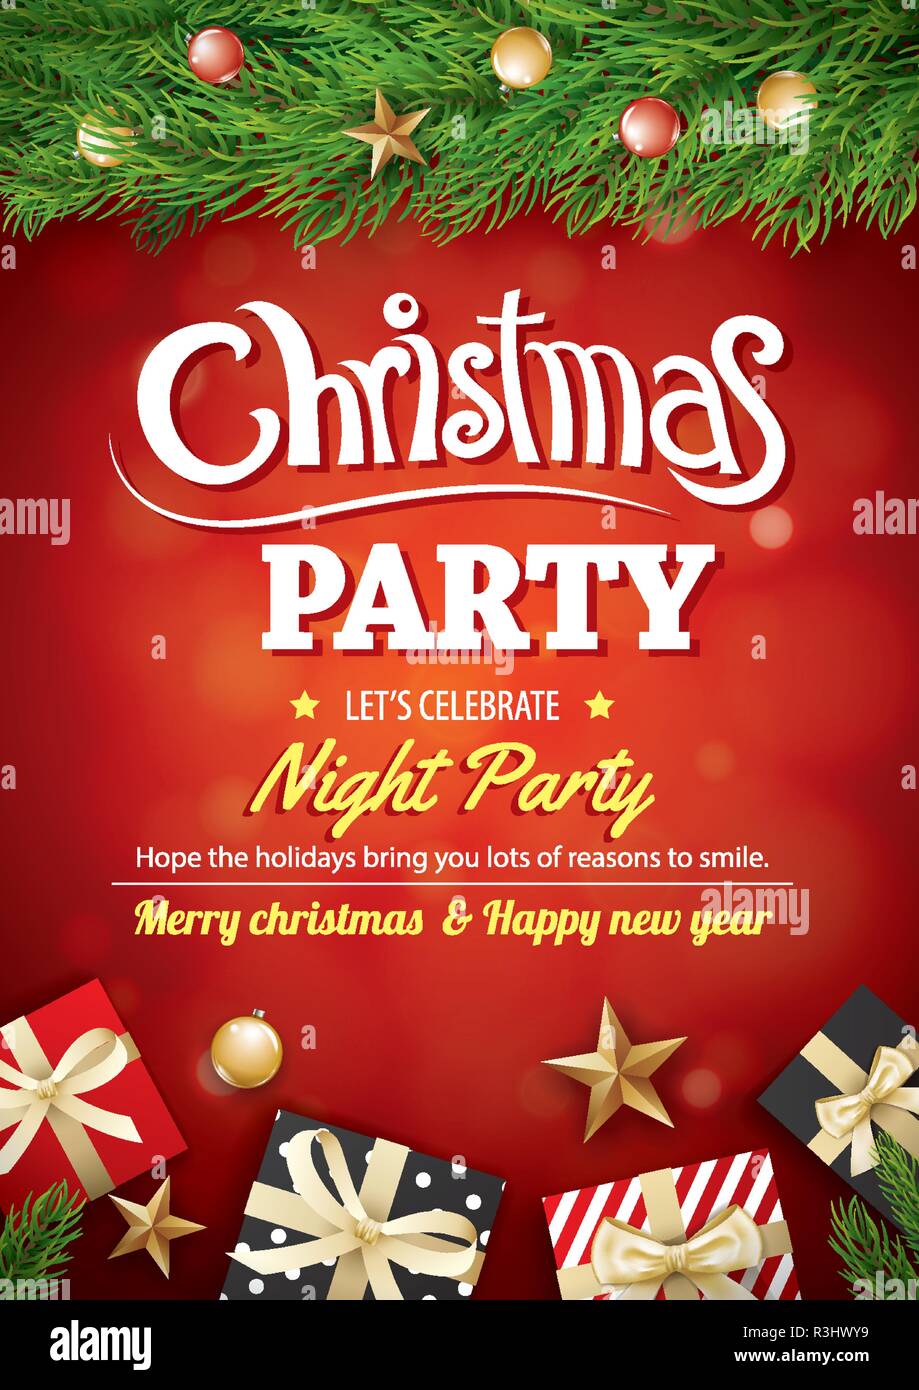 Best Background Christmas Party Tarpaulin Layout and design templates ...